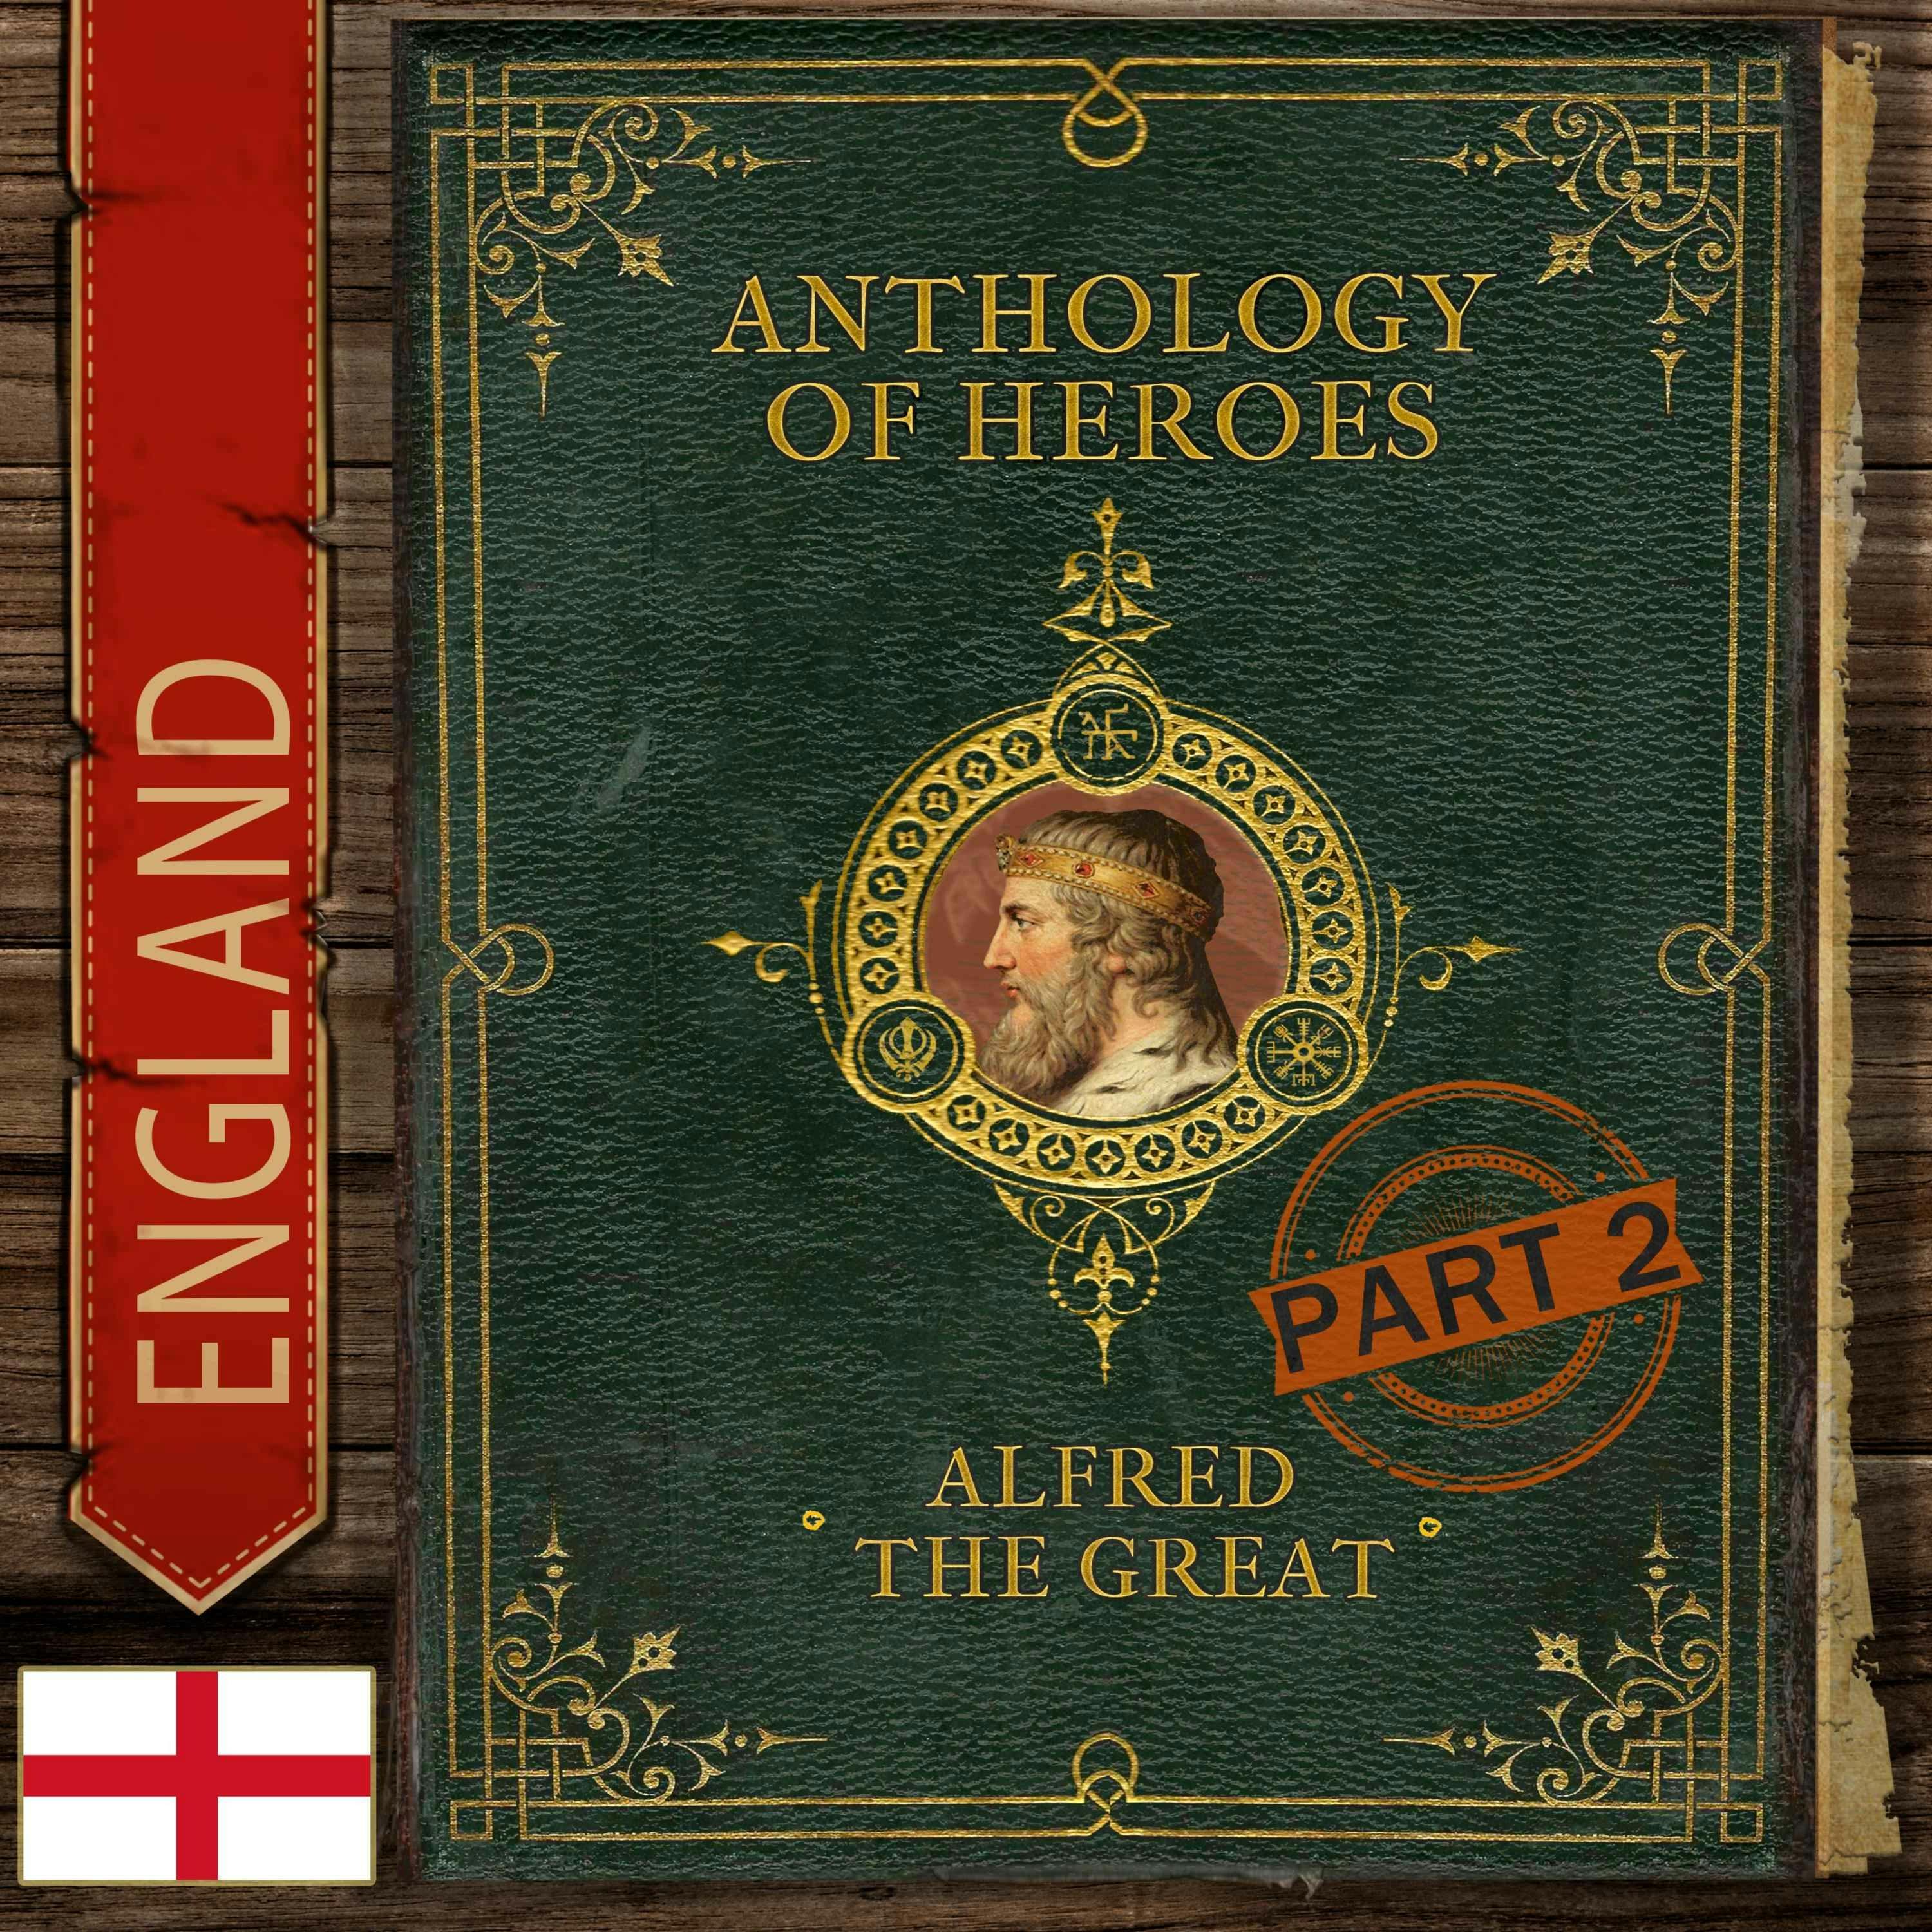 Alfred The Great And The Last Kingdom (Part 2)